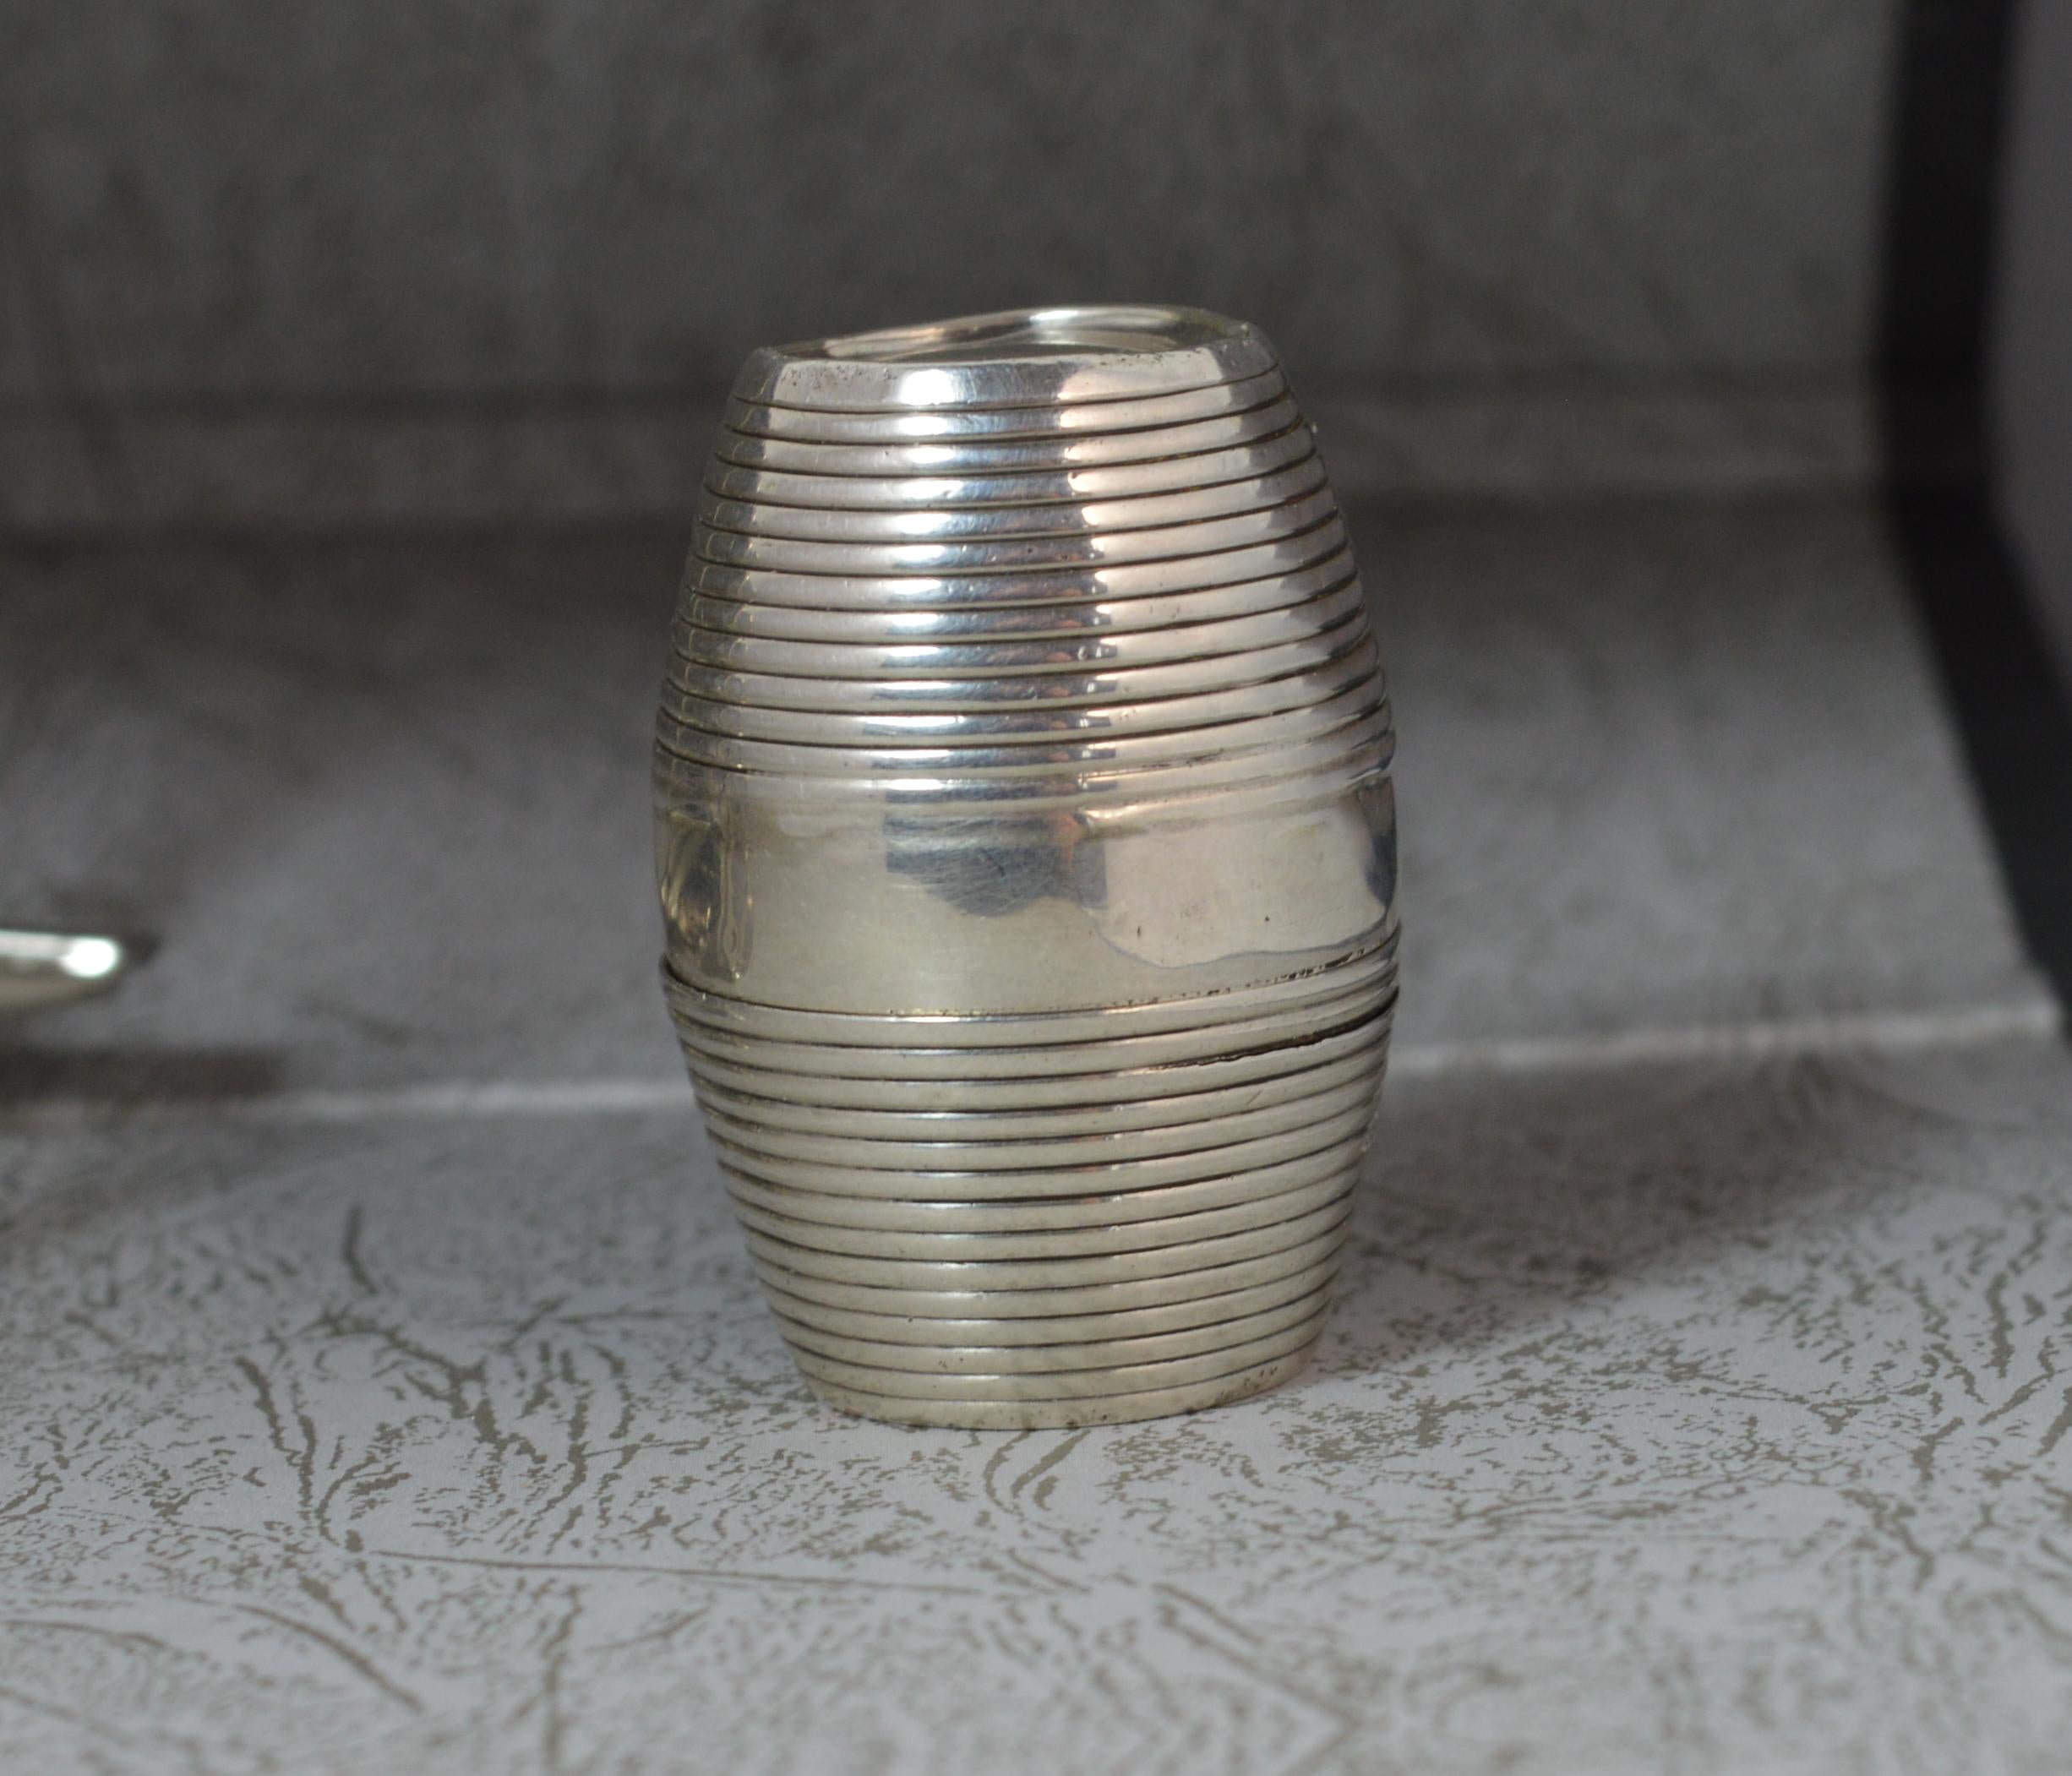 A highly desirable and rare Georgian solid silver nutmeg grater.
Fine barrel shape.

Hallmarks ; lion, King George head, date letter O, London assay, makers initials SM
Weight ; 24.8 grams
Size ; 21mm diameter base , 44mm tall
Condition ; Okay for